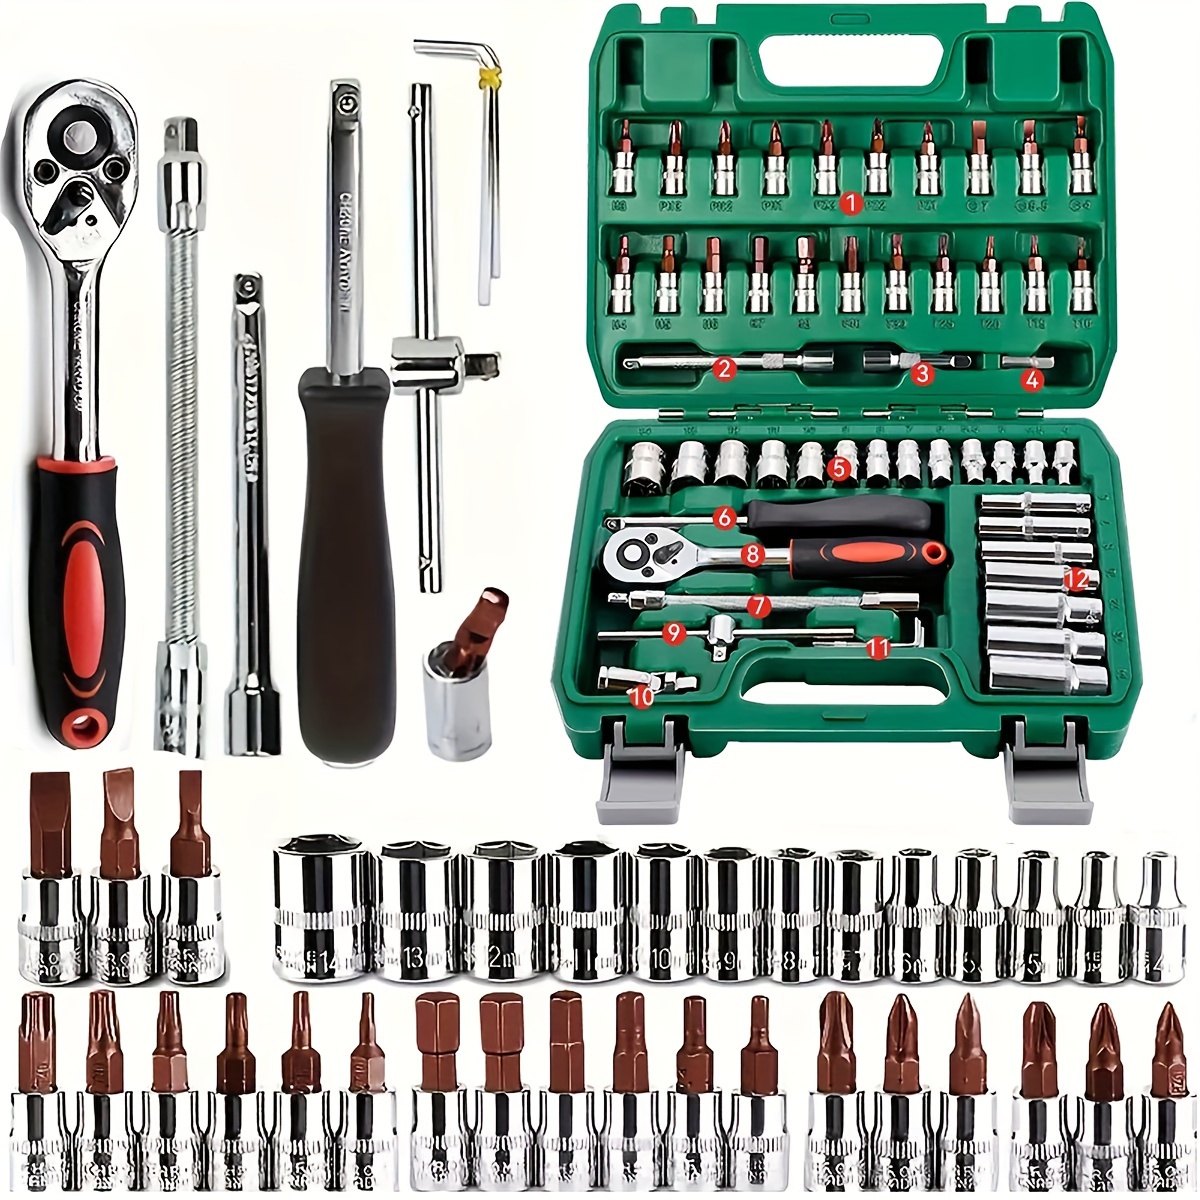 

53-piece Drive Socket Set, Sae And Metric Hex Bit Socket Set, Ratchet Wrench Set With S2 & Cr-v Sockets, Mechanic Tool Kits For Auto Repair